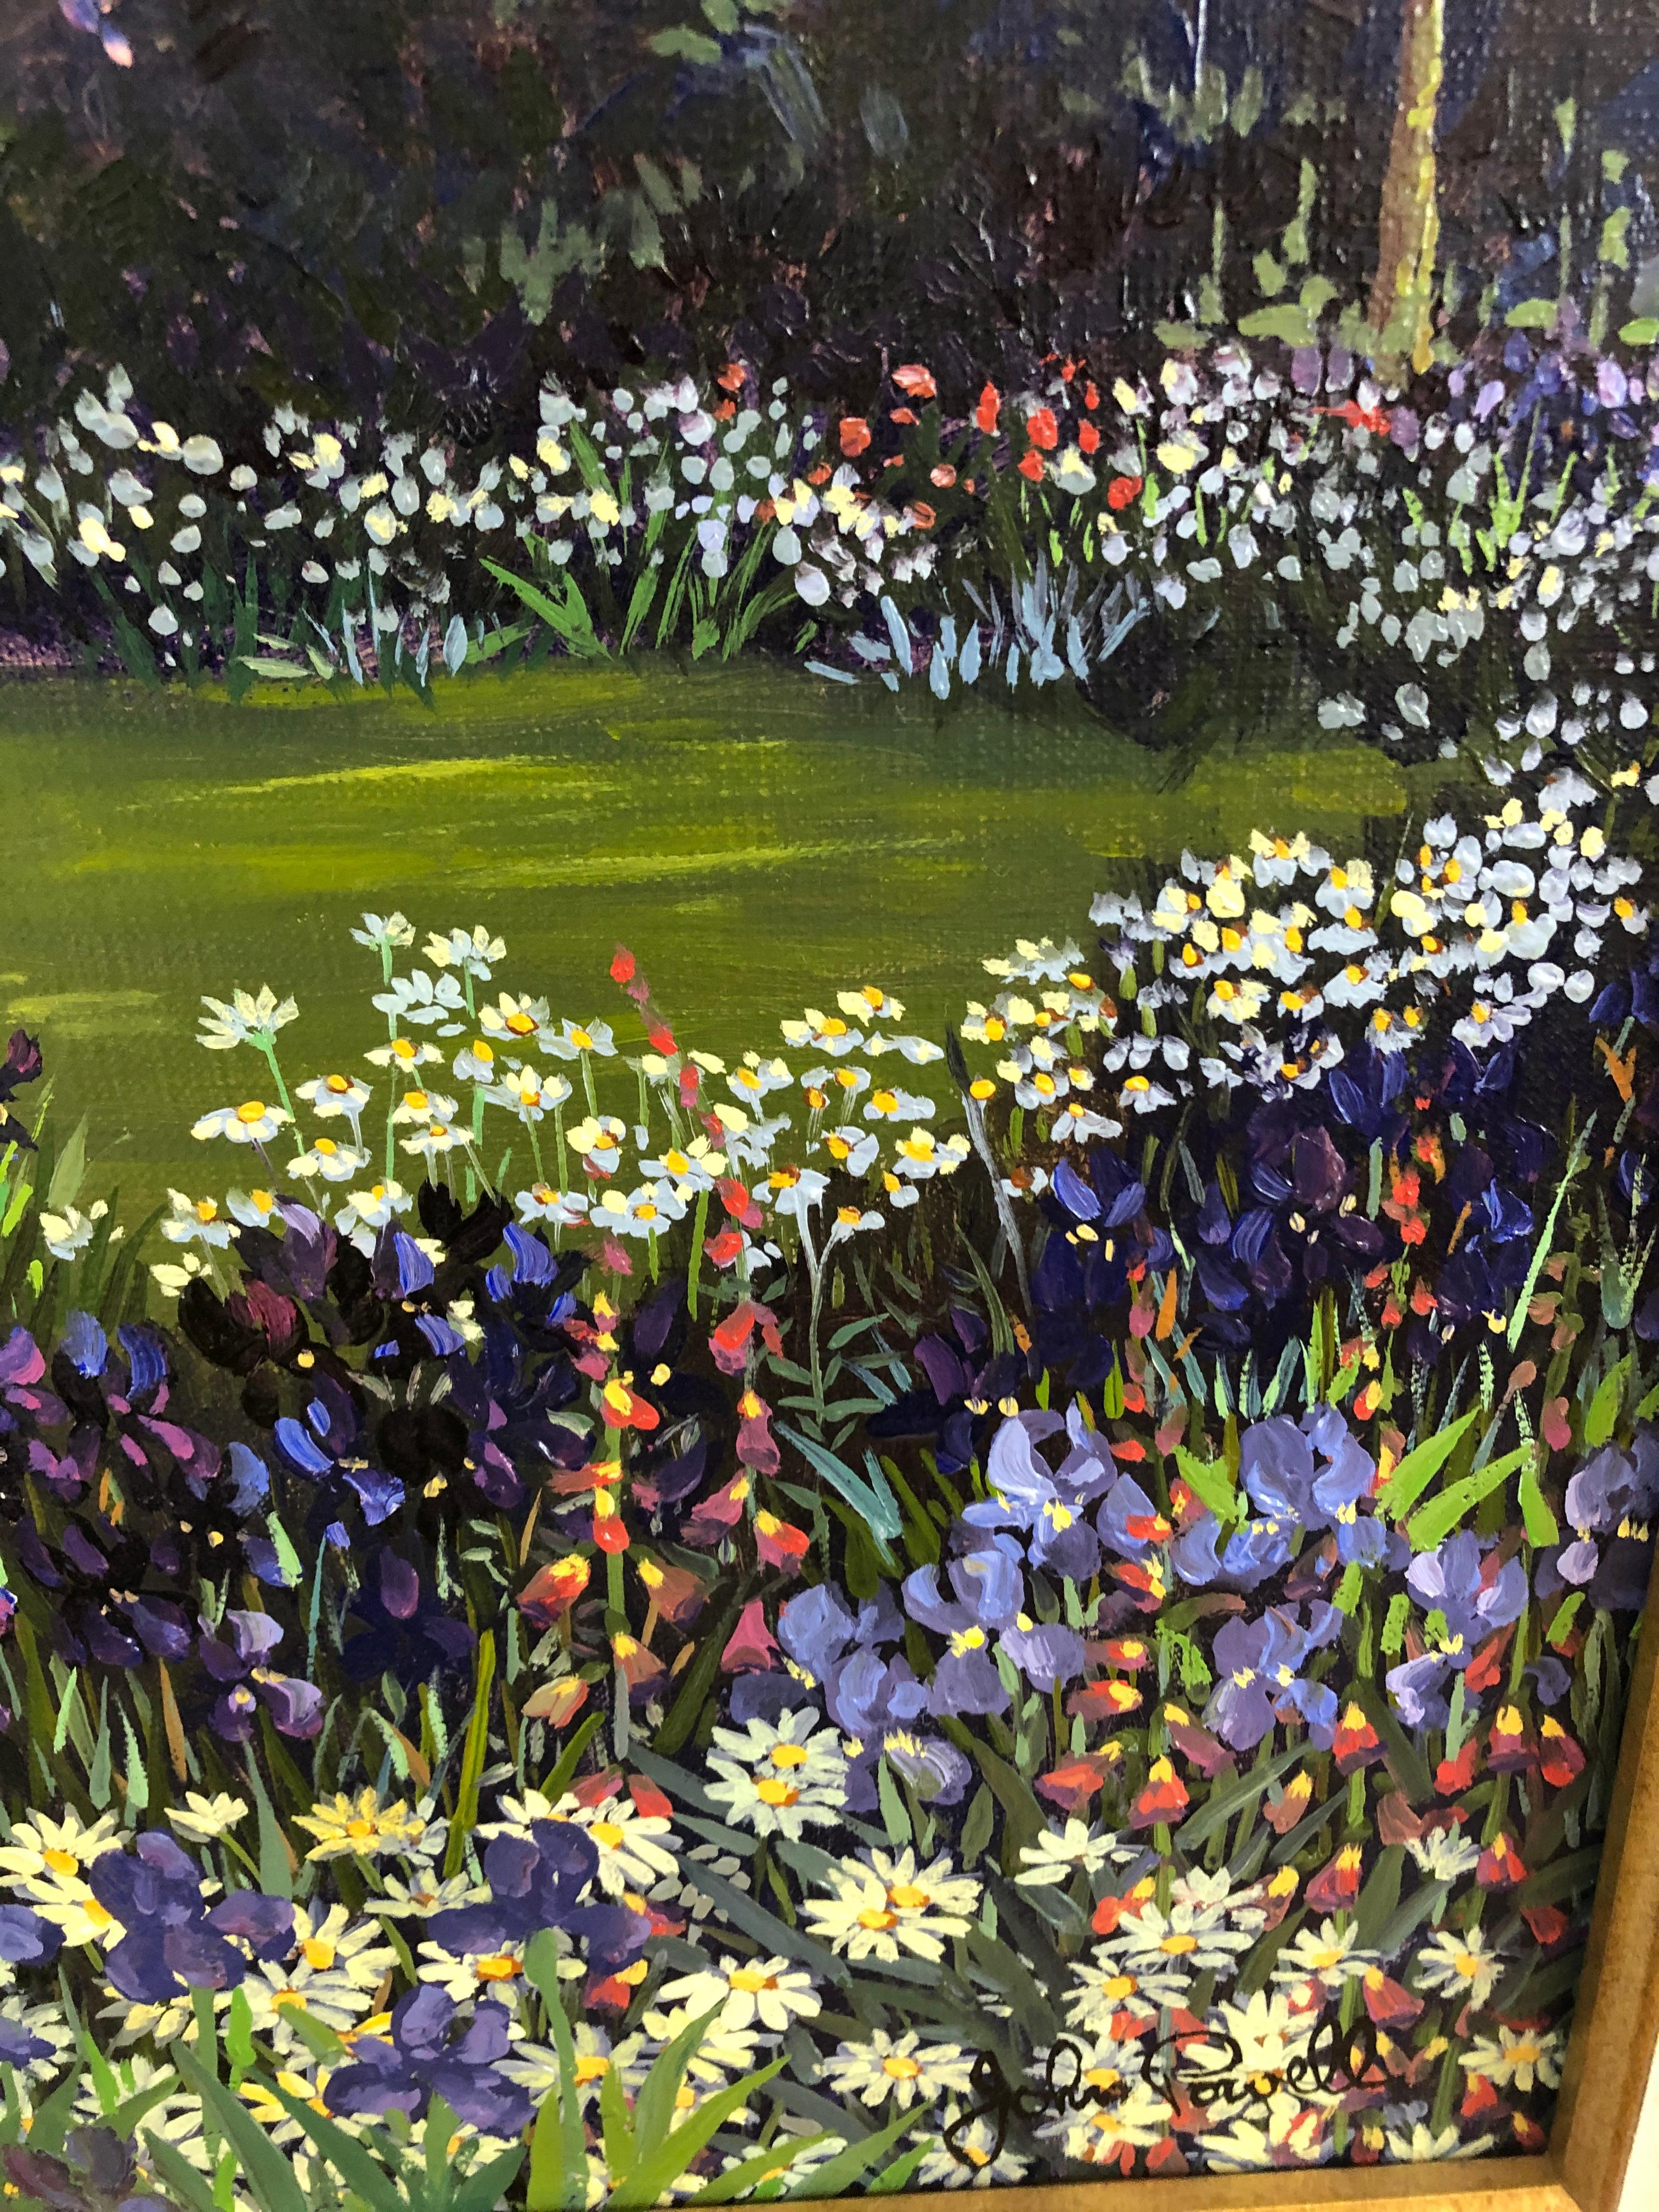 North American Pulsatingly Alive Garden Landscape Painting by John Powell